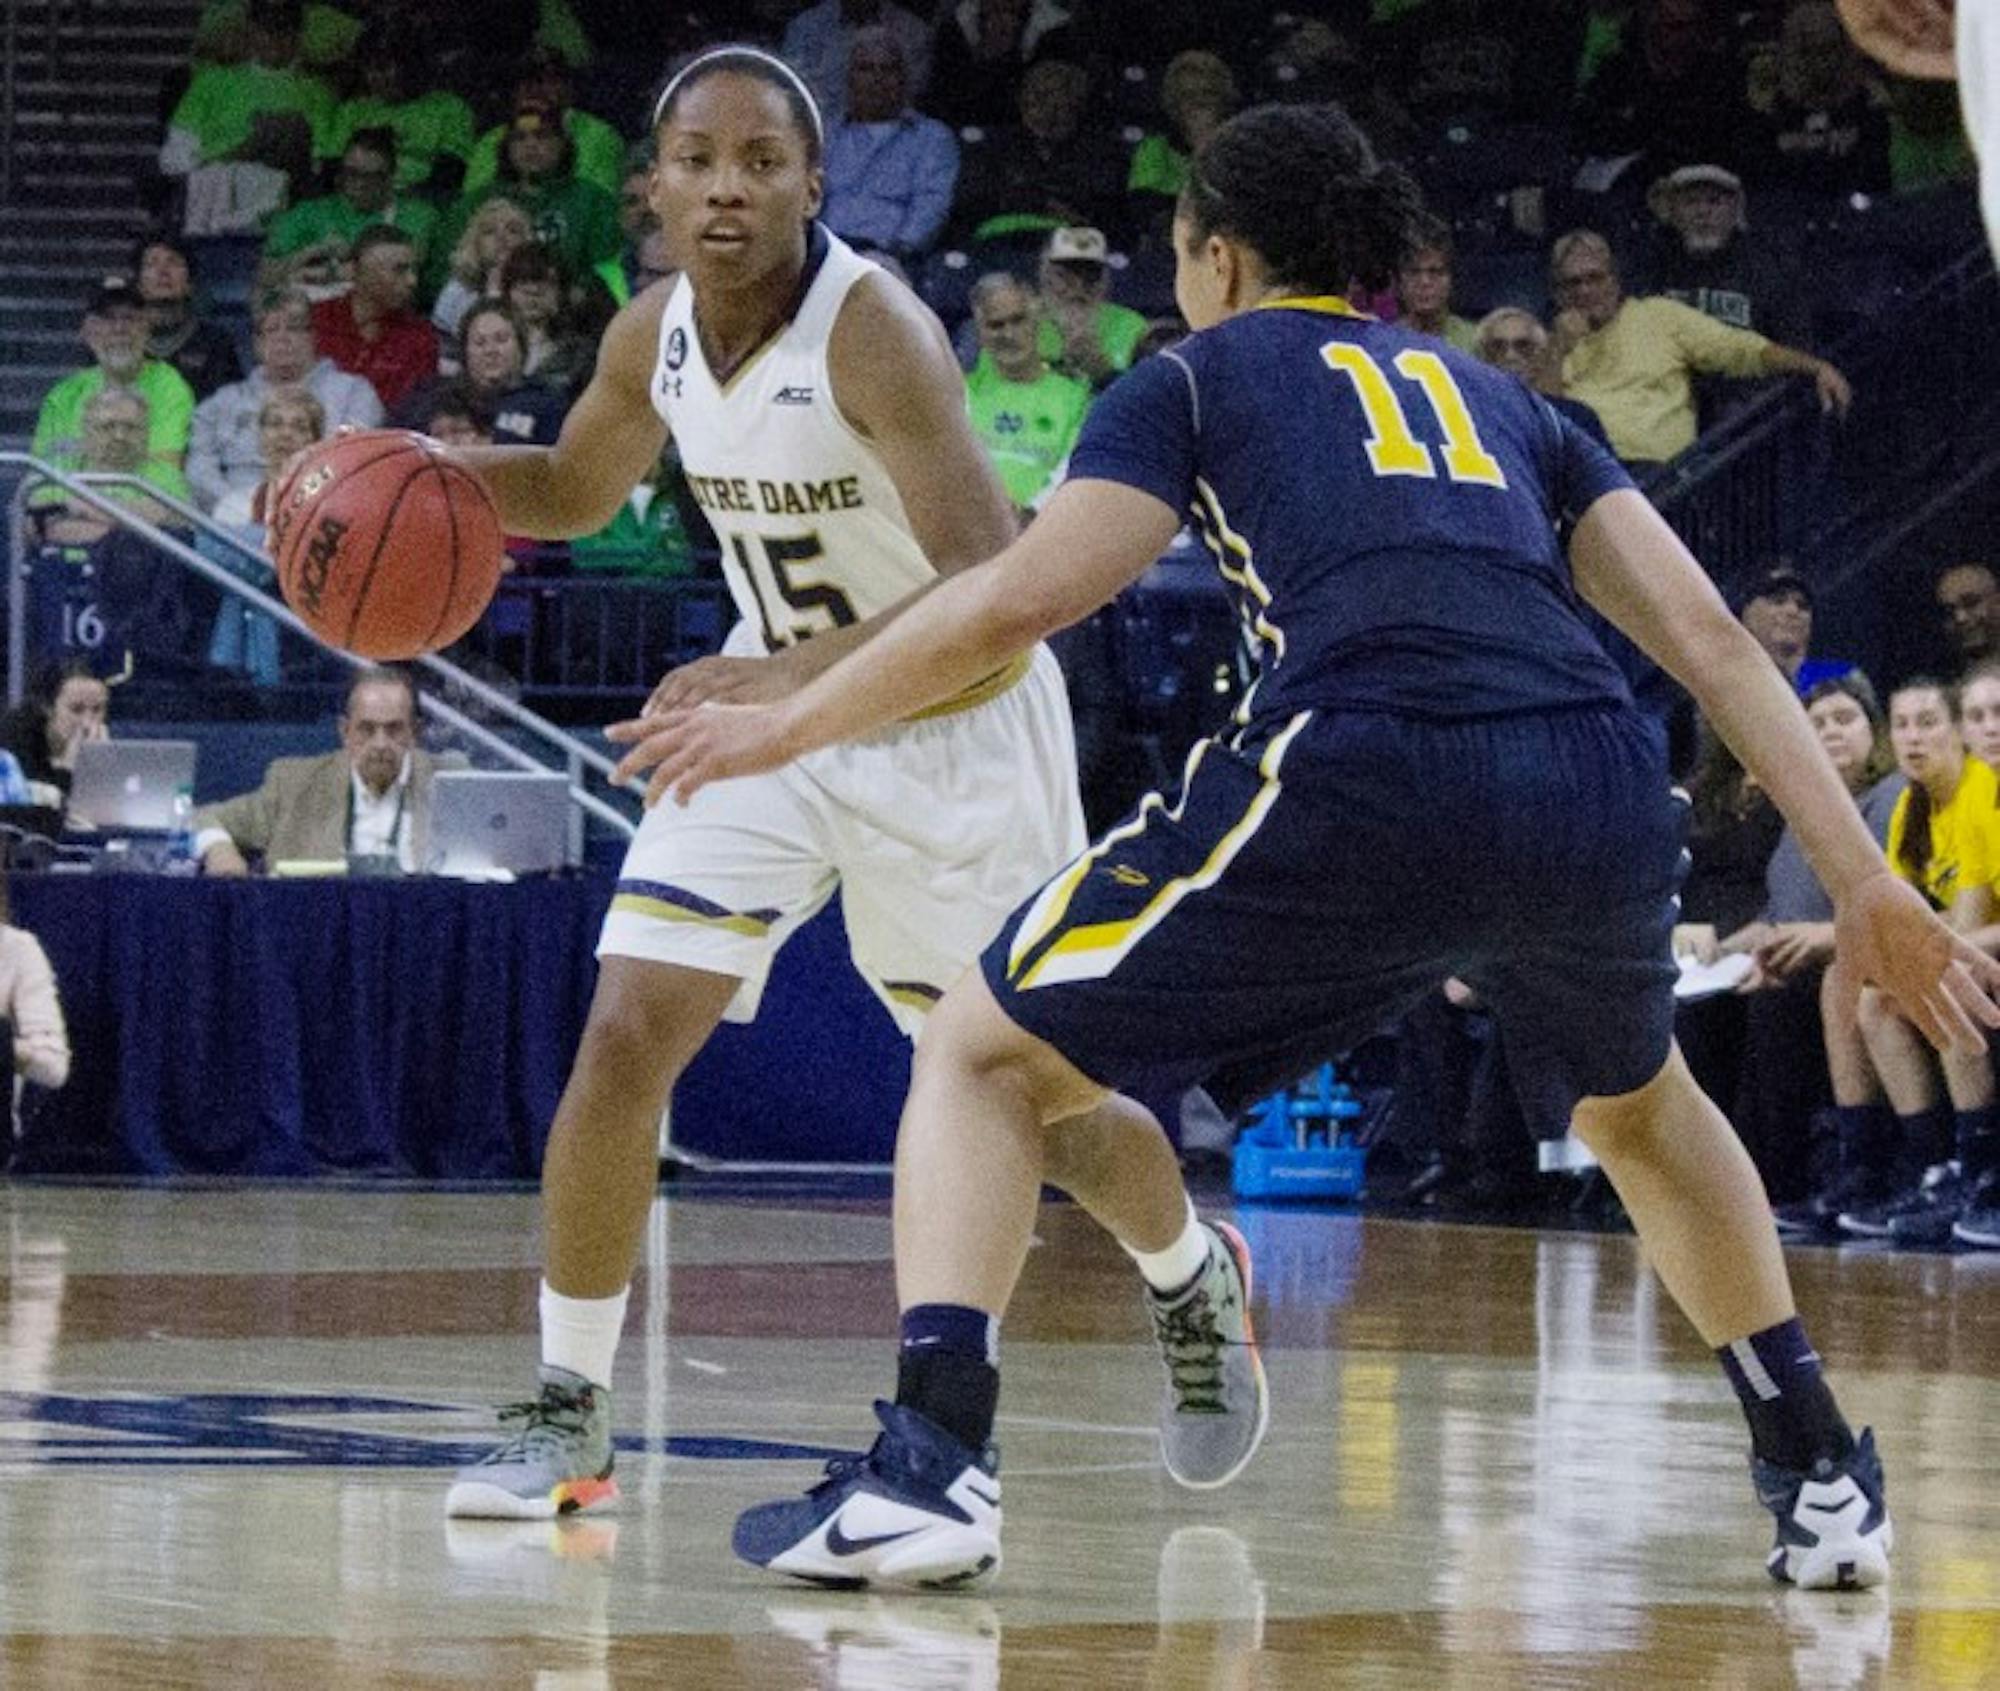 Junior guard Lindsay Allen sizes up a defender during the 74-39 Irish victory over Toledo at Purcell  Pavilion on Wednesday night. Allen had 10 points and nine assists in the win.